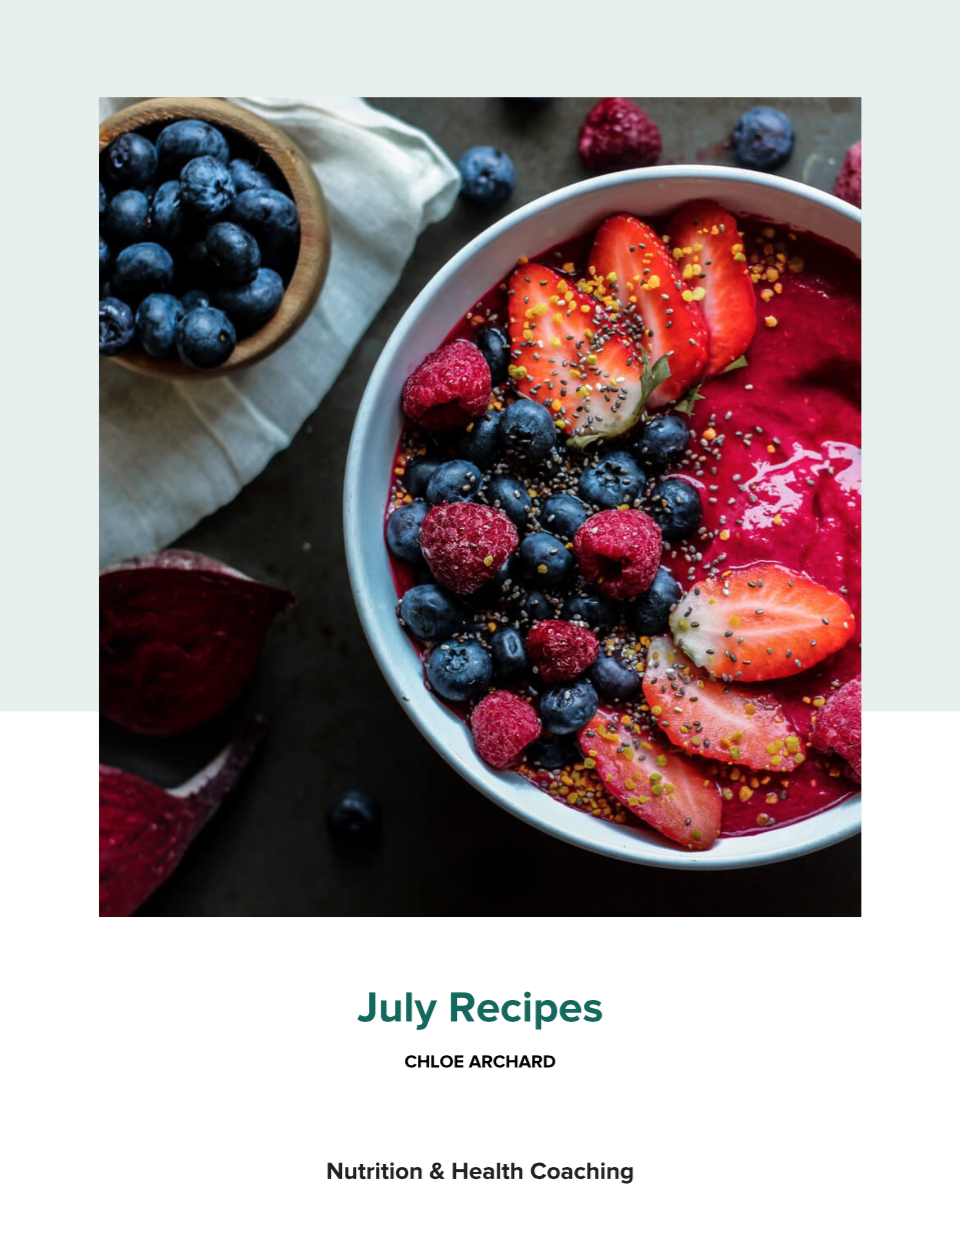 Day 39: Free Recipe Book for You, July 2021